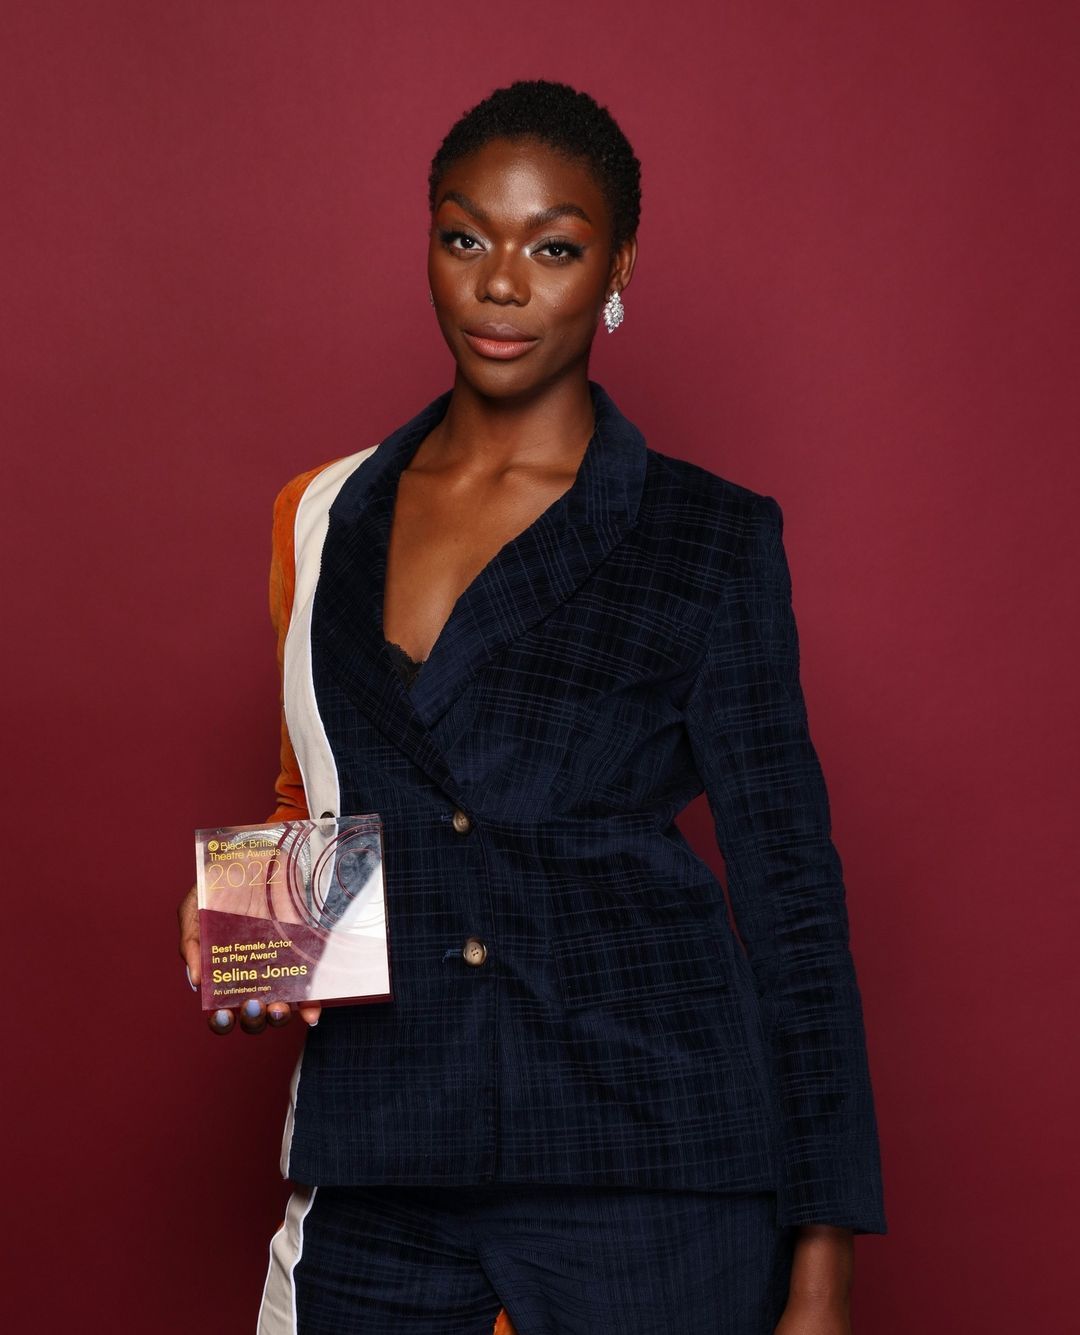 Selina Jones in the Tosin blazer and trousers at the Black British Theatre Awards.